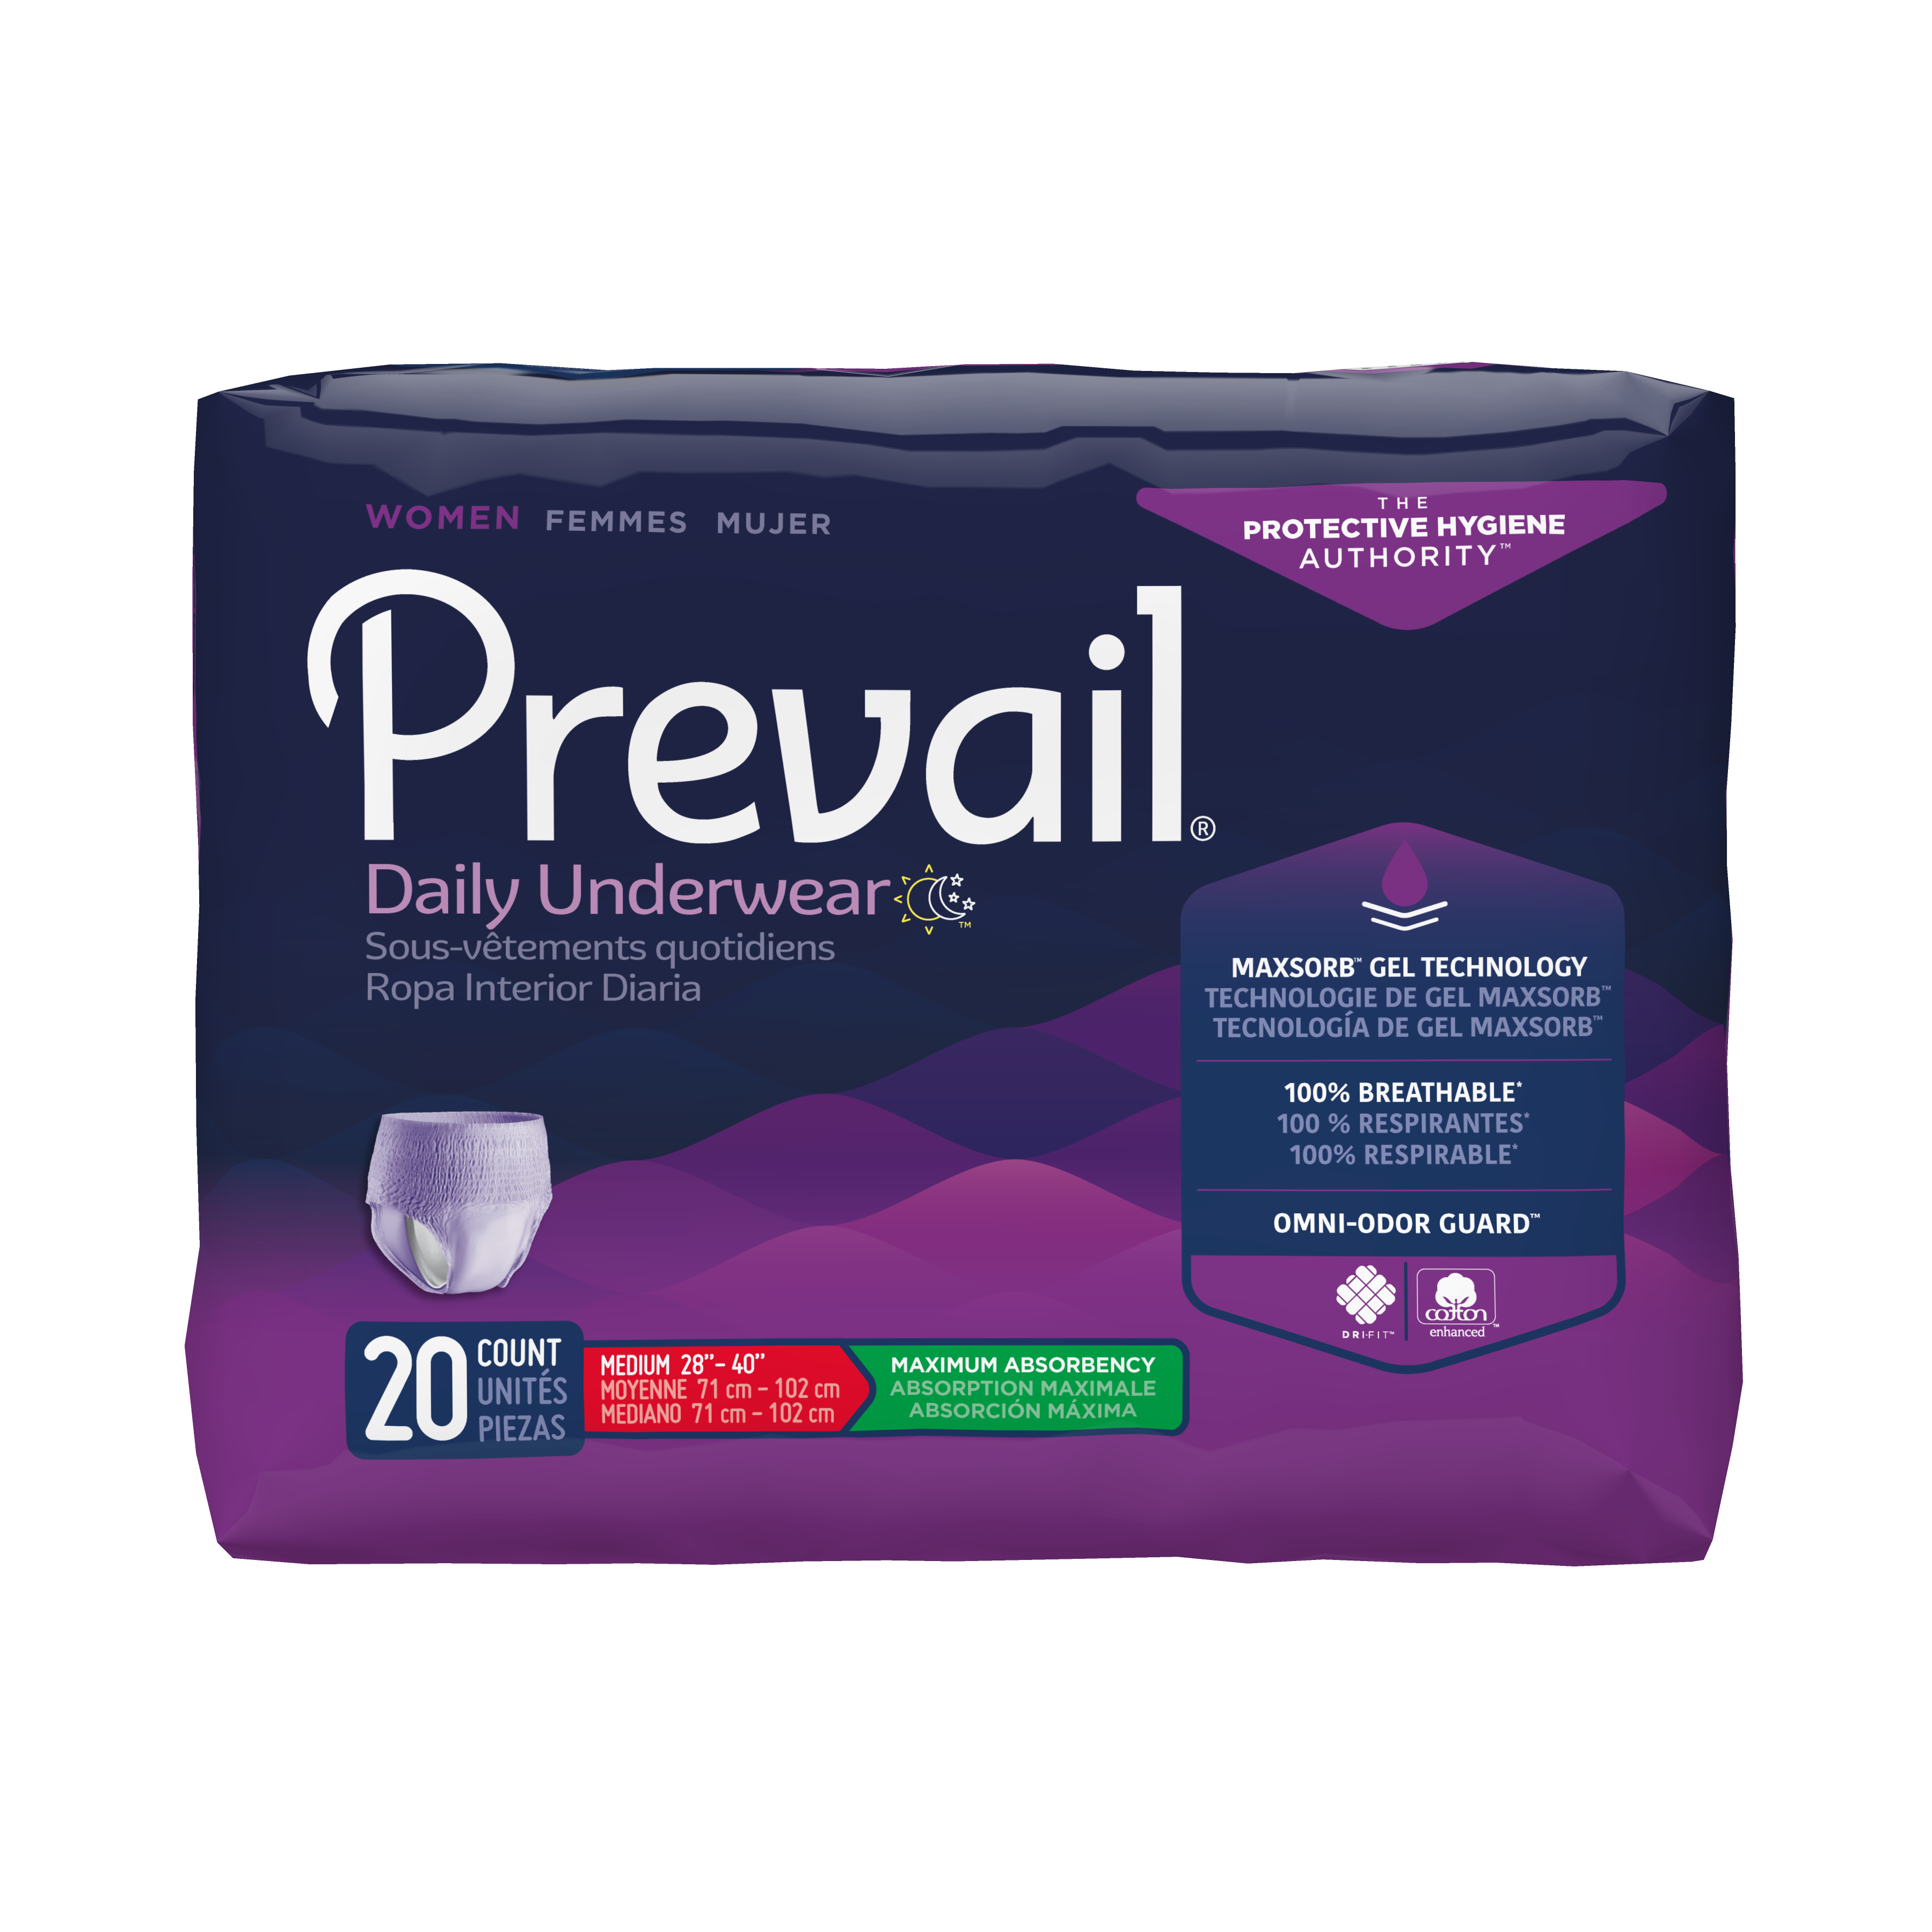 Prevail Daily Pull-Up Underwear For Women, Maximum,PWC-512/1,Medium 28-40" - Pack of 20